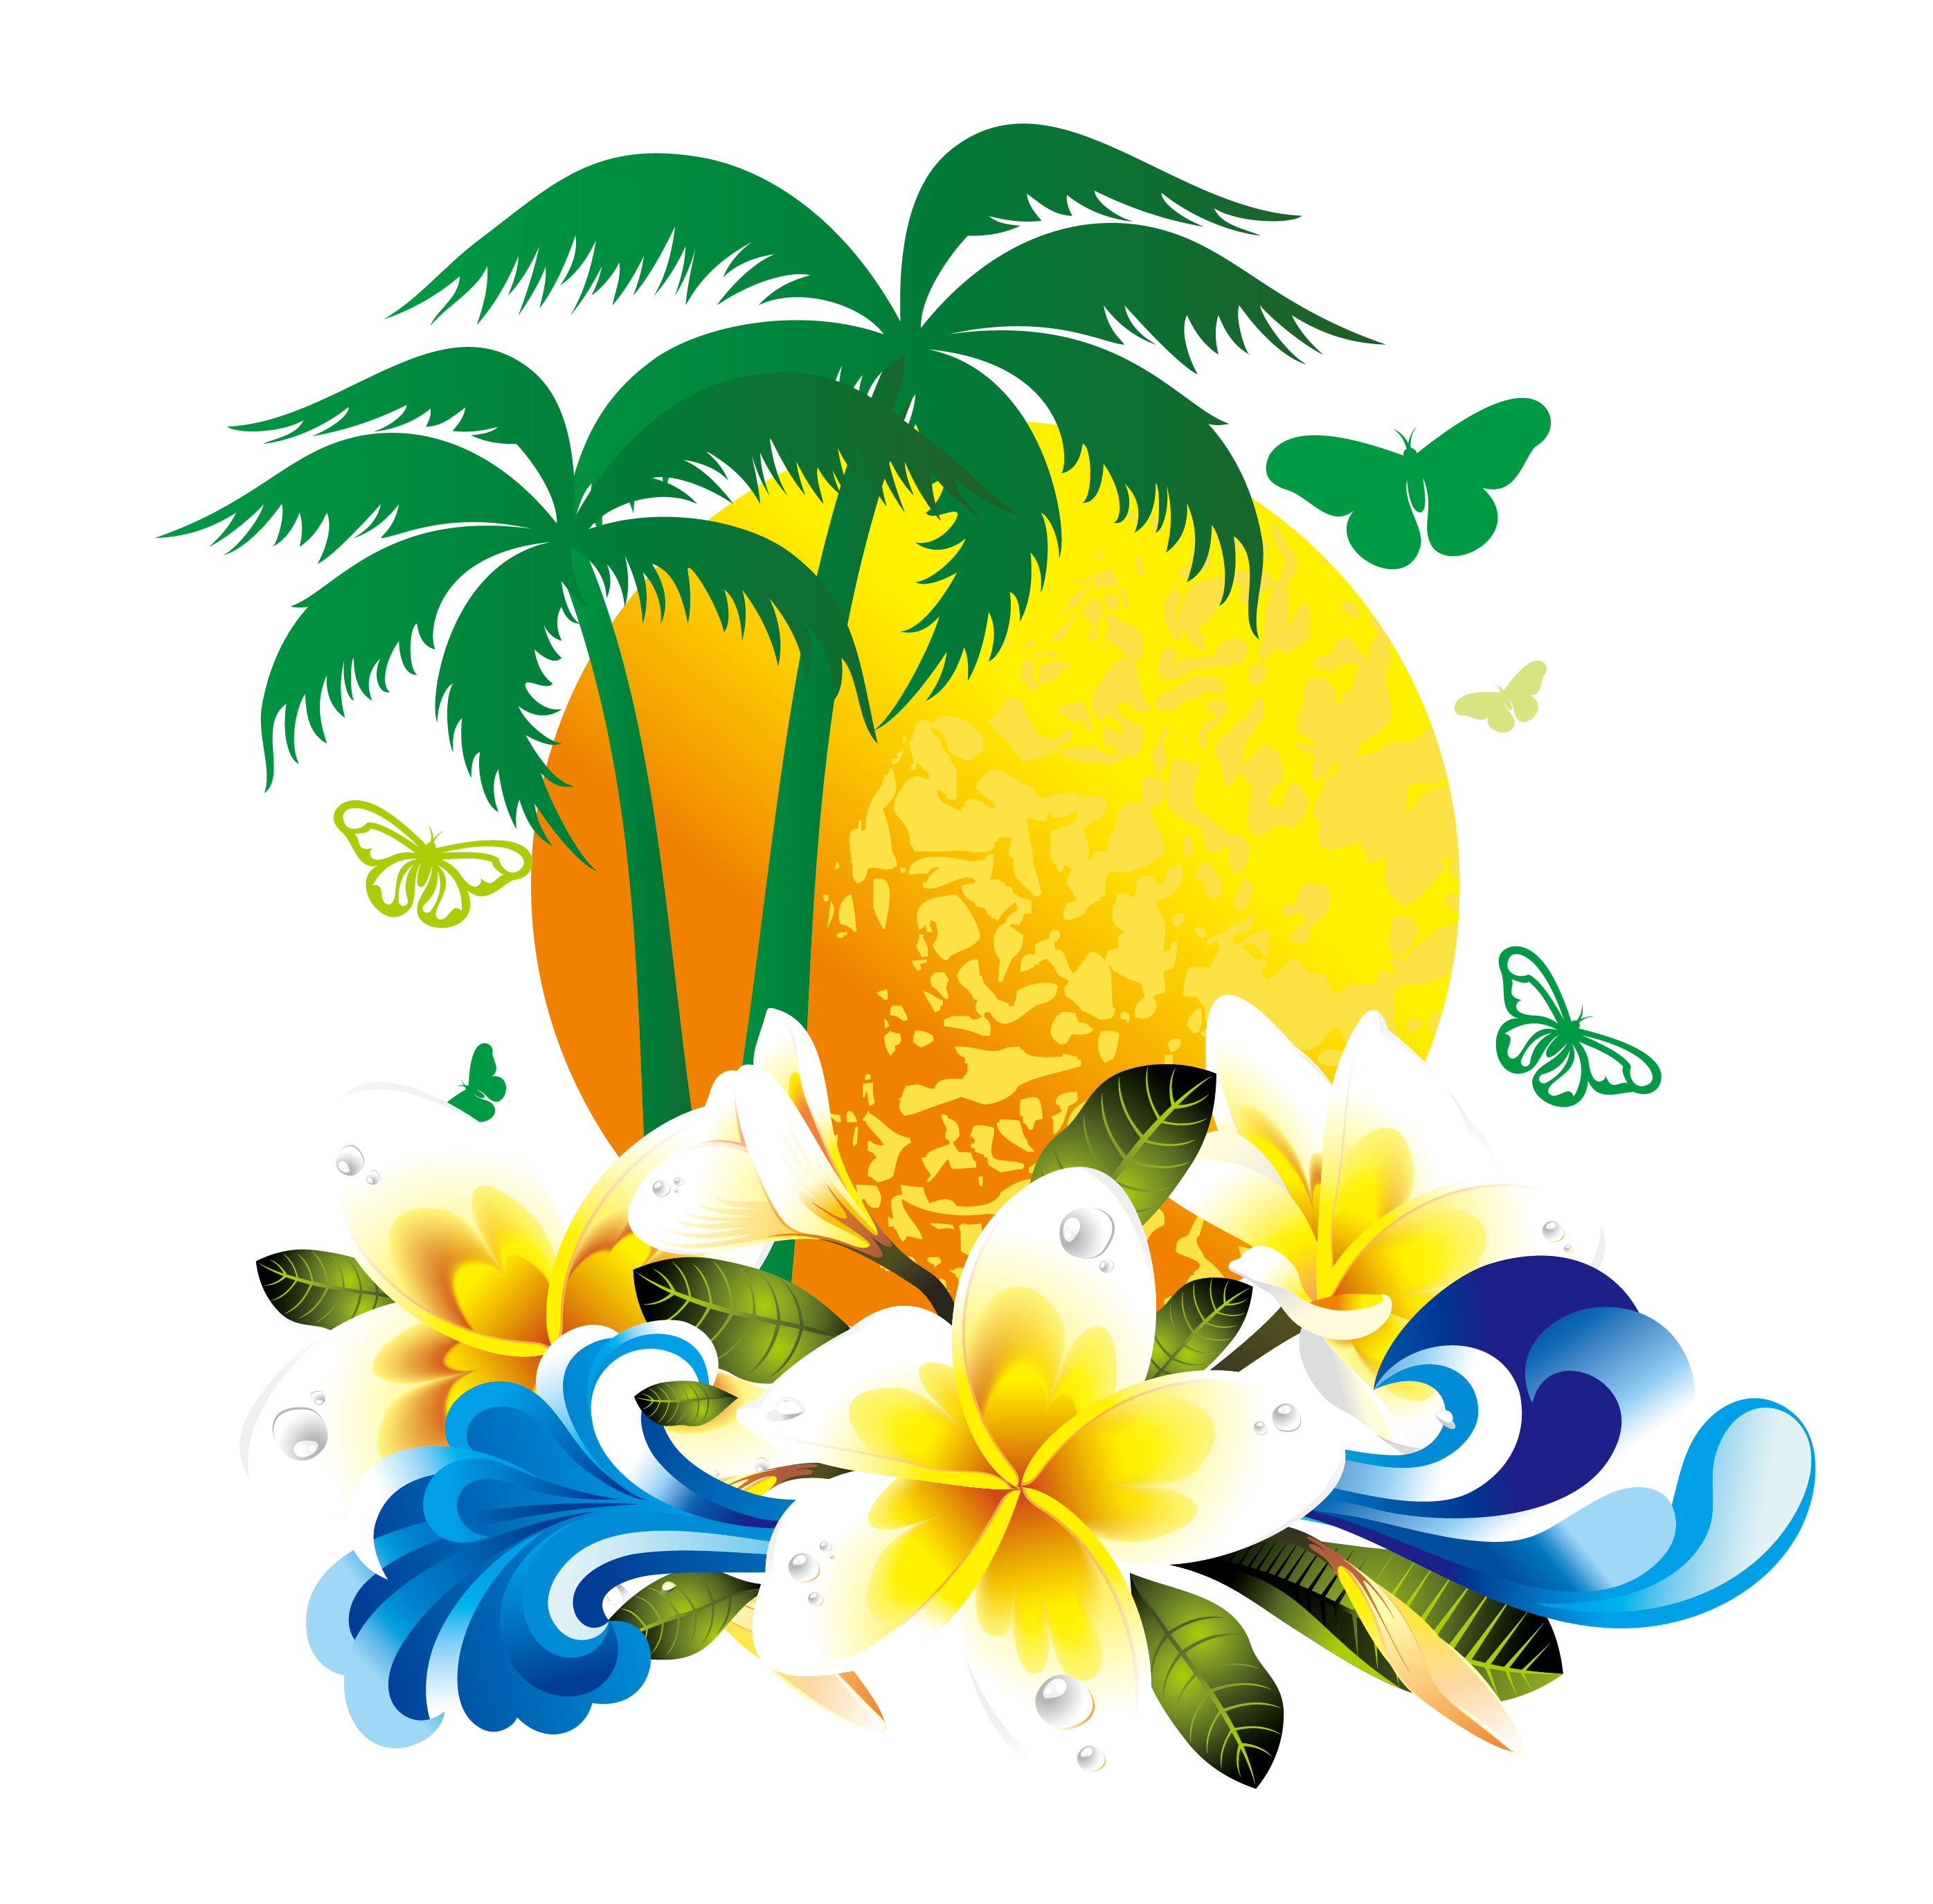 Coconut clipart tropical coconut. Gorgeous flowers tree material